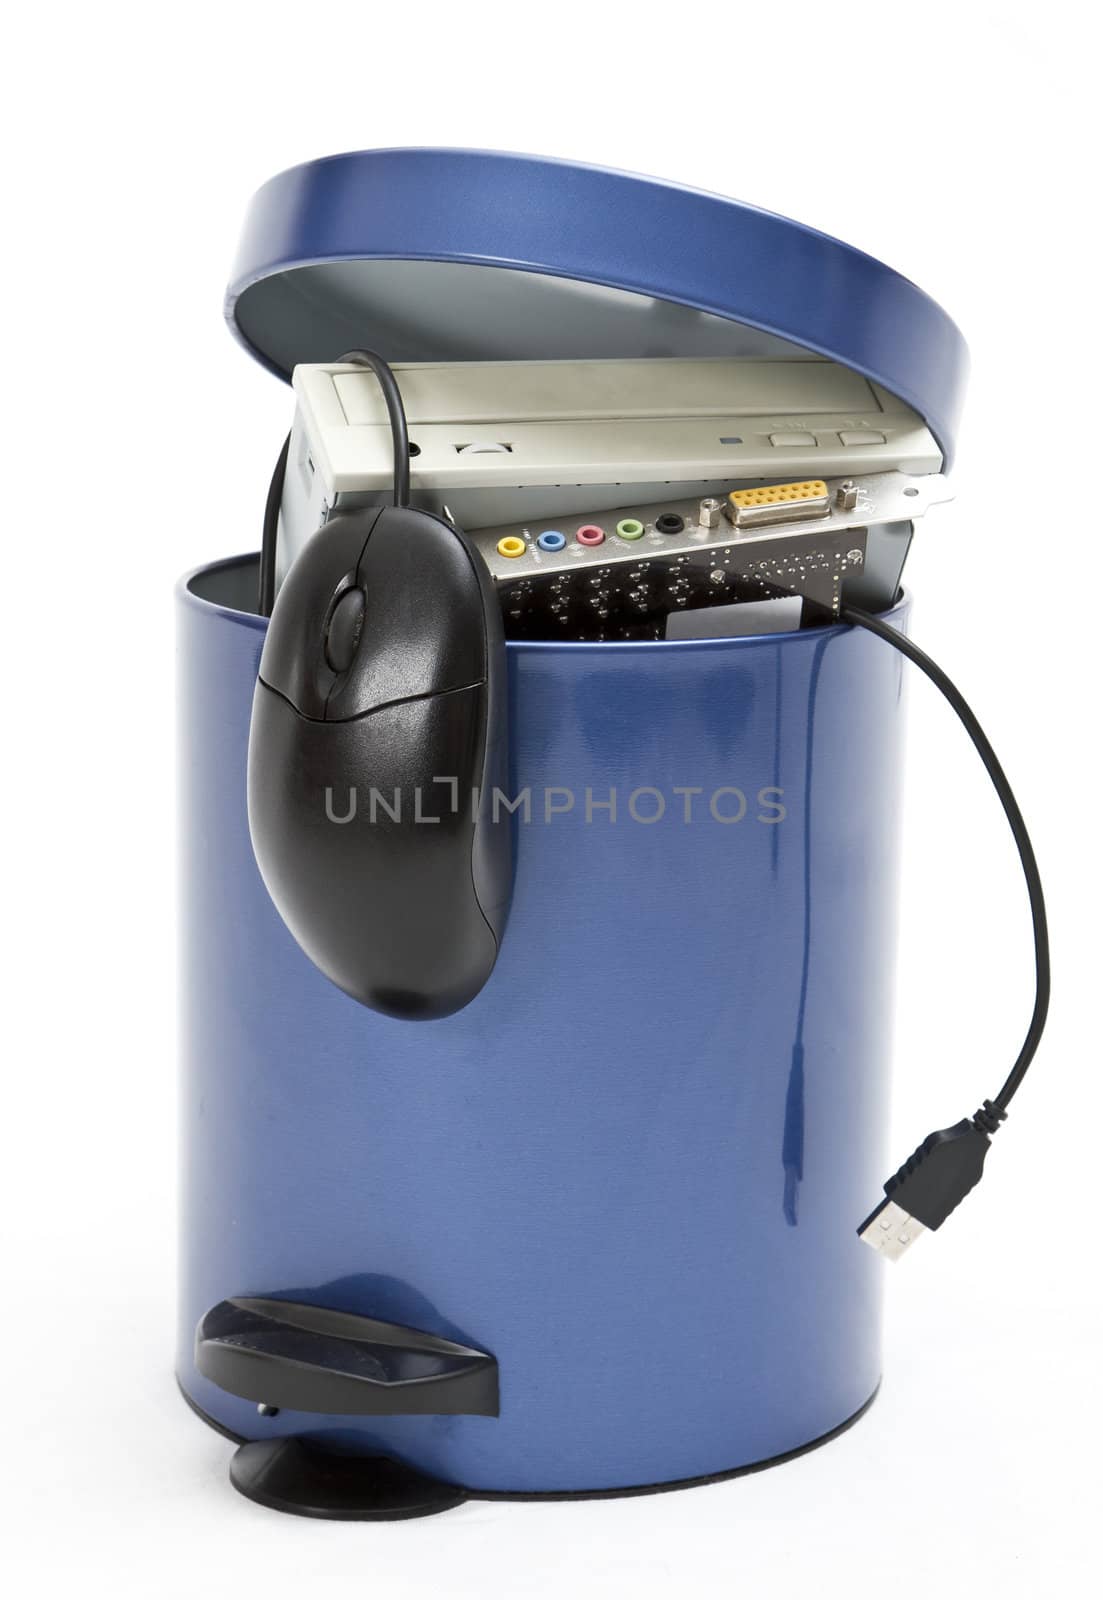 trashcan with electronic waste by gewoldi